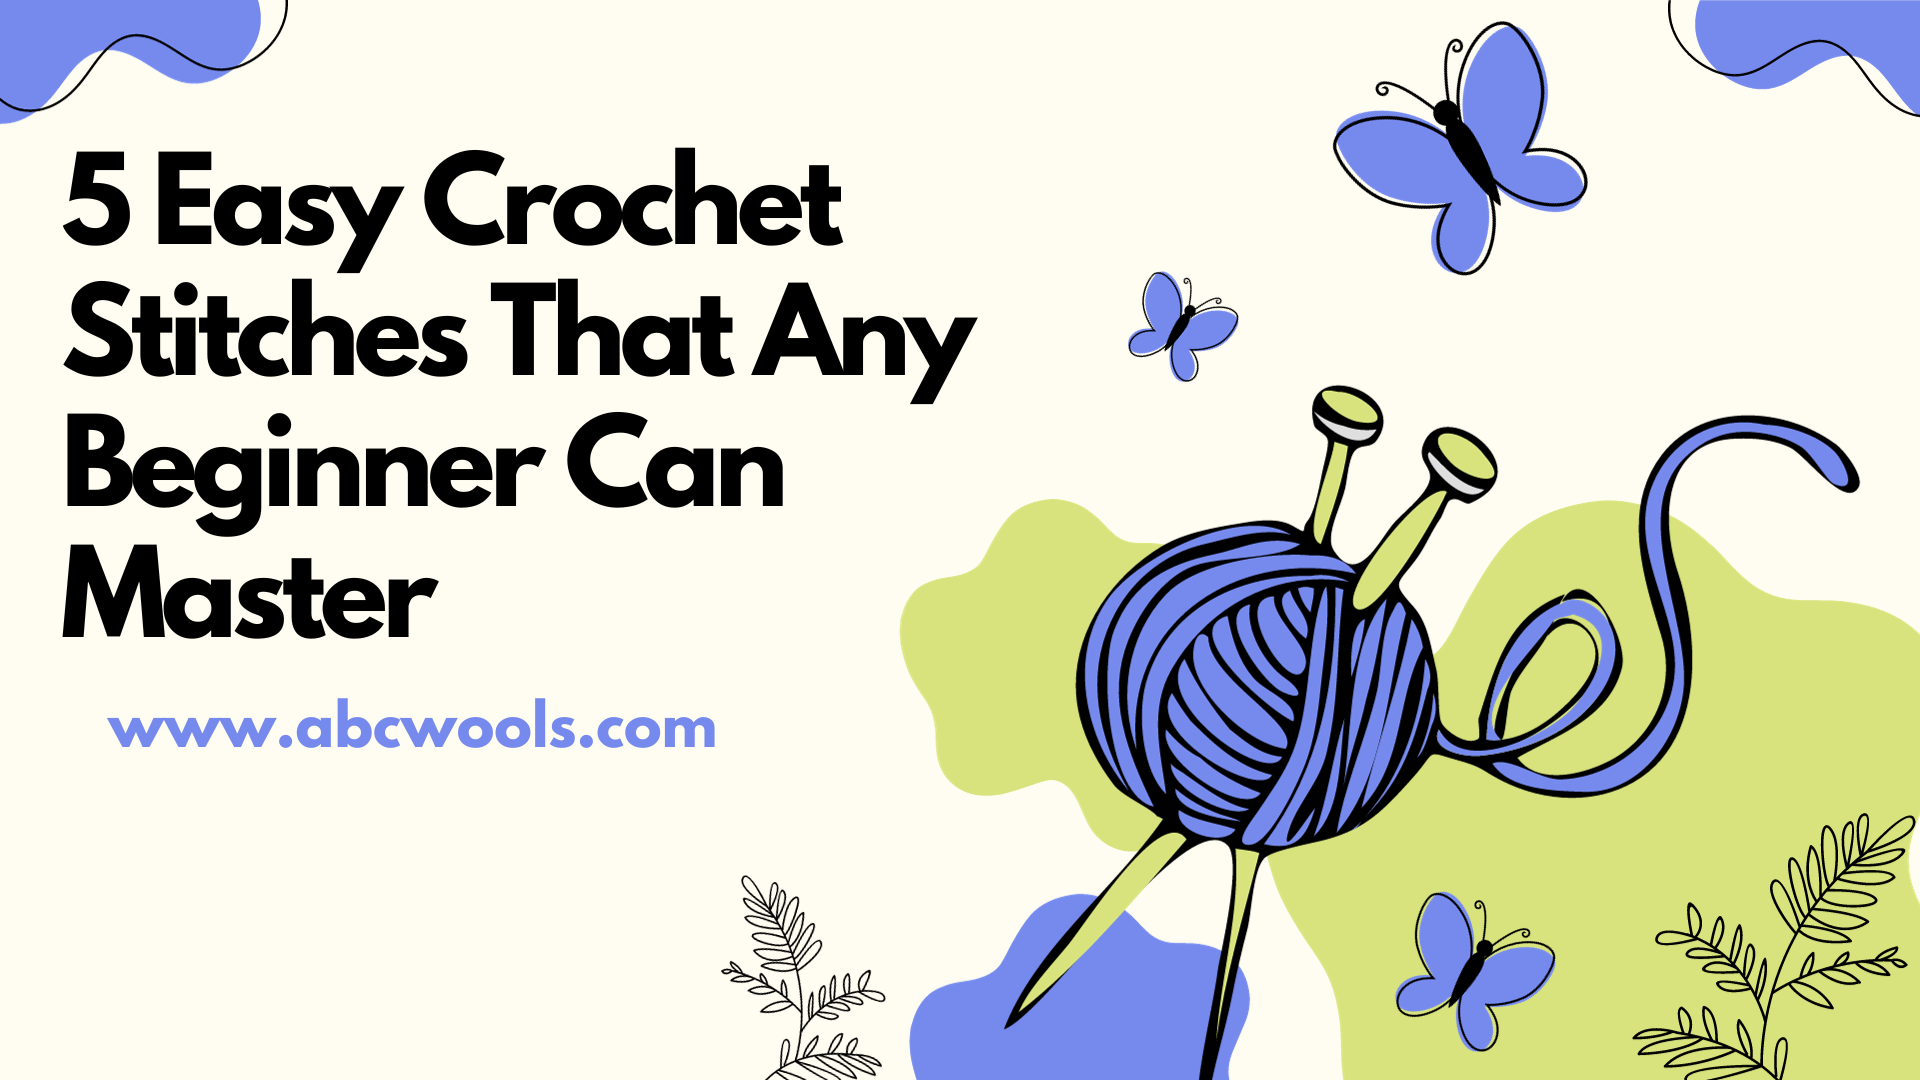 5 Easy Crochet Stitches That Any Beginner Can Master